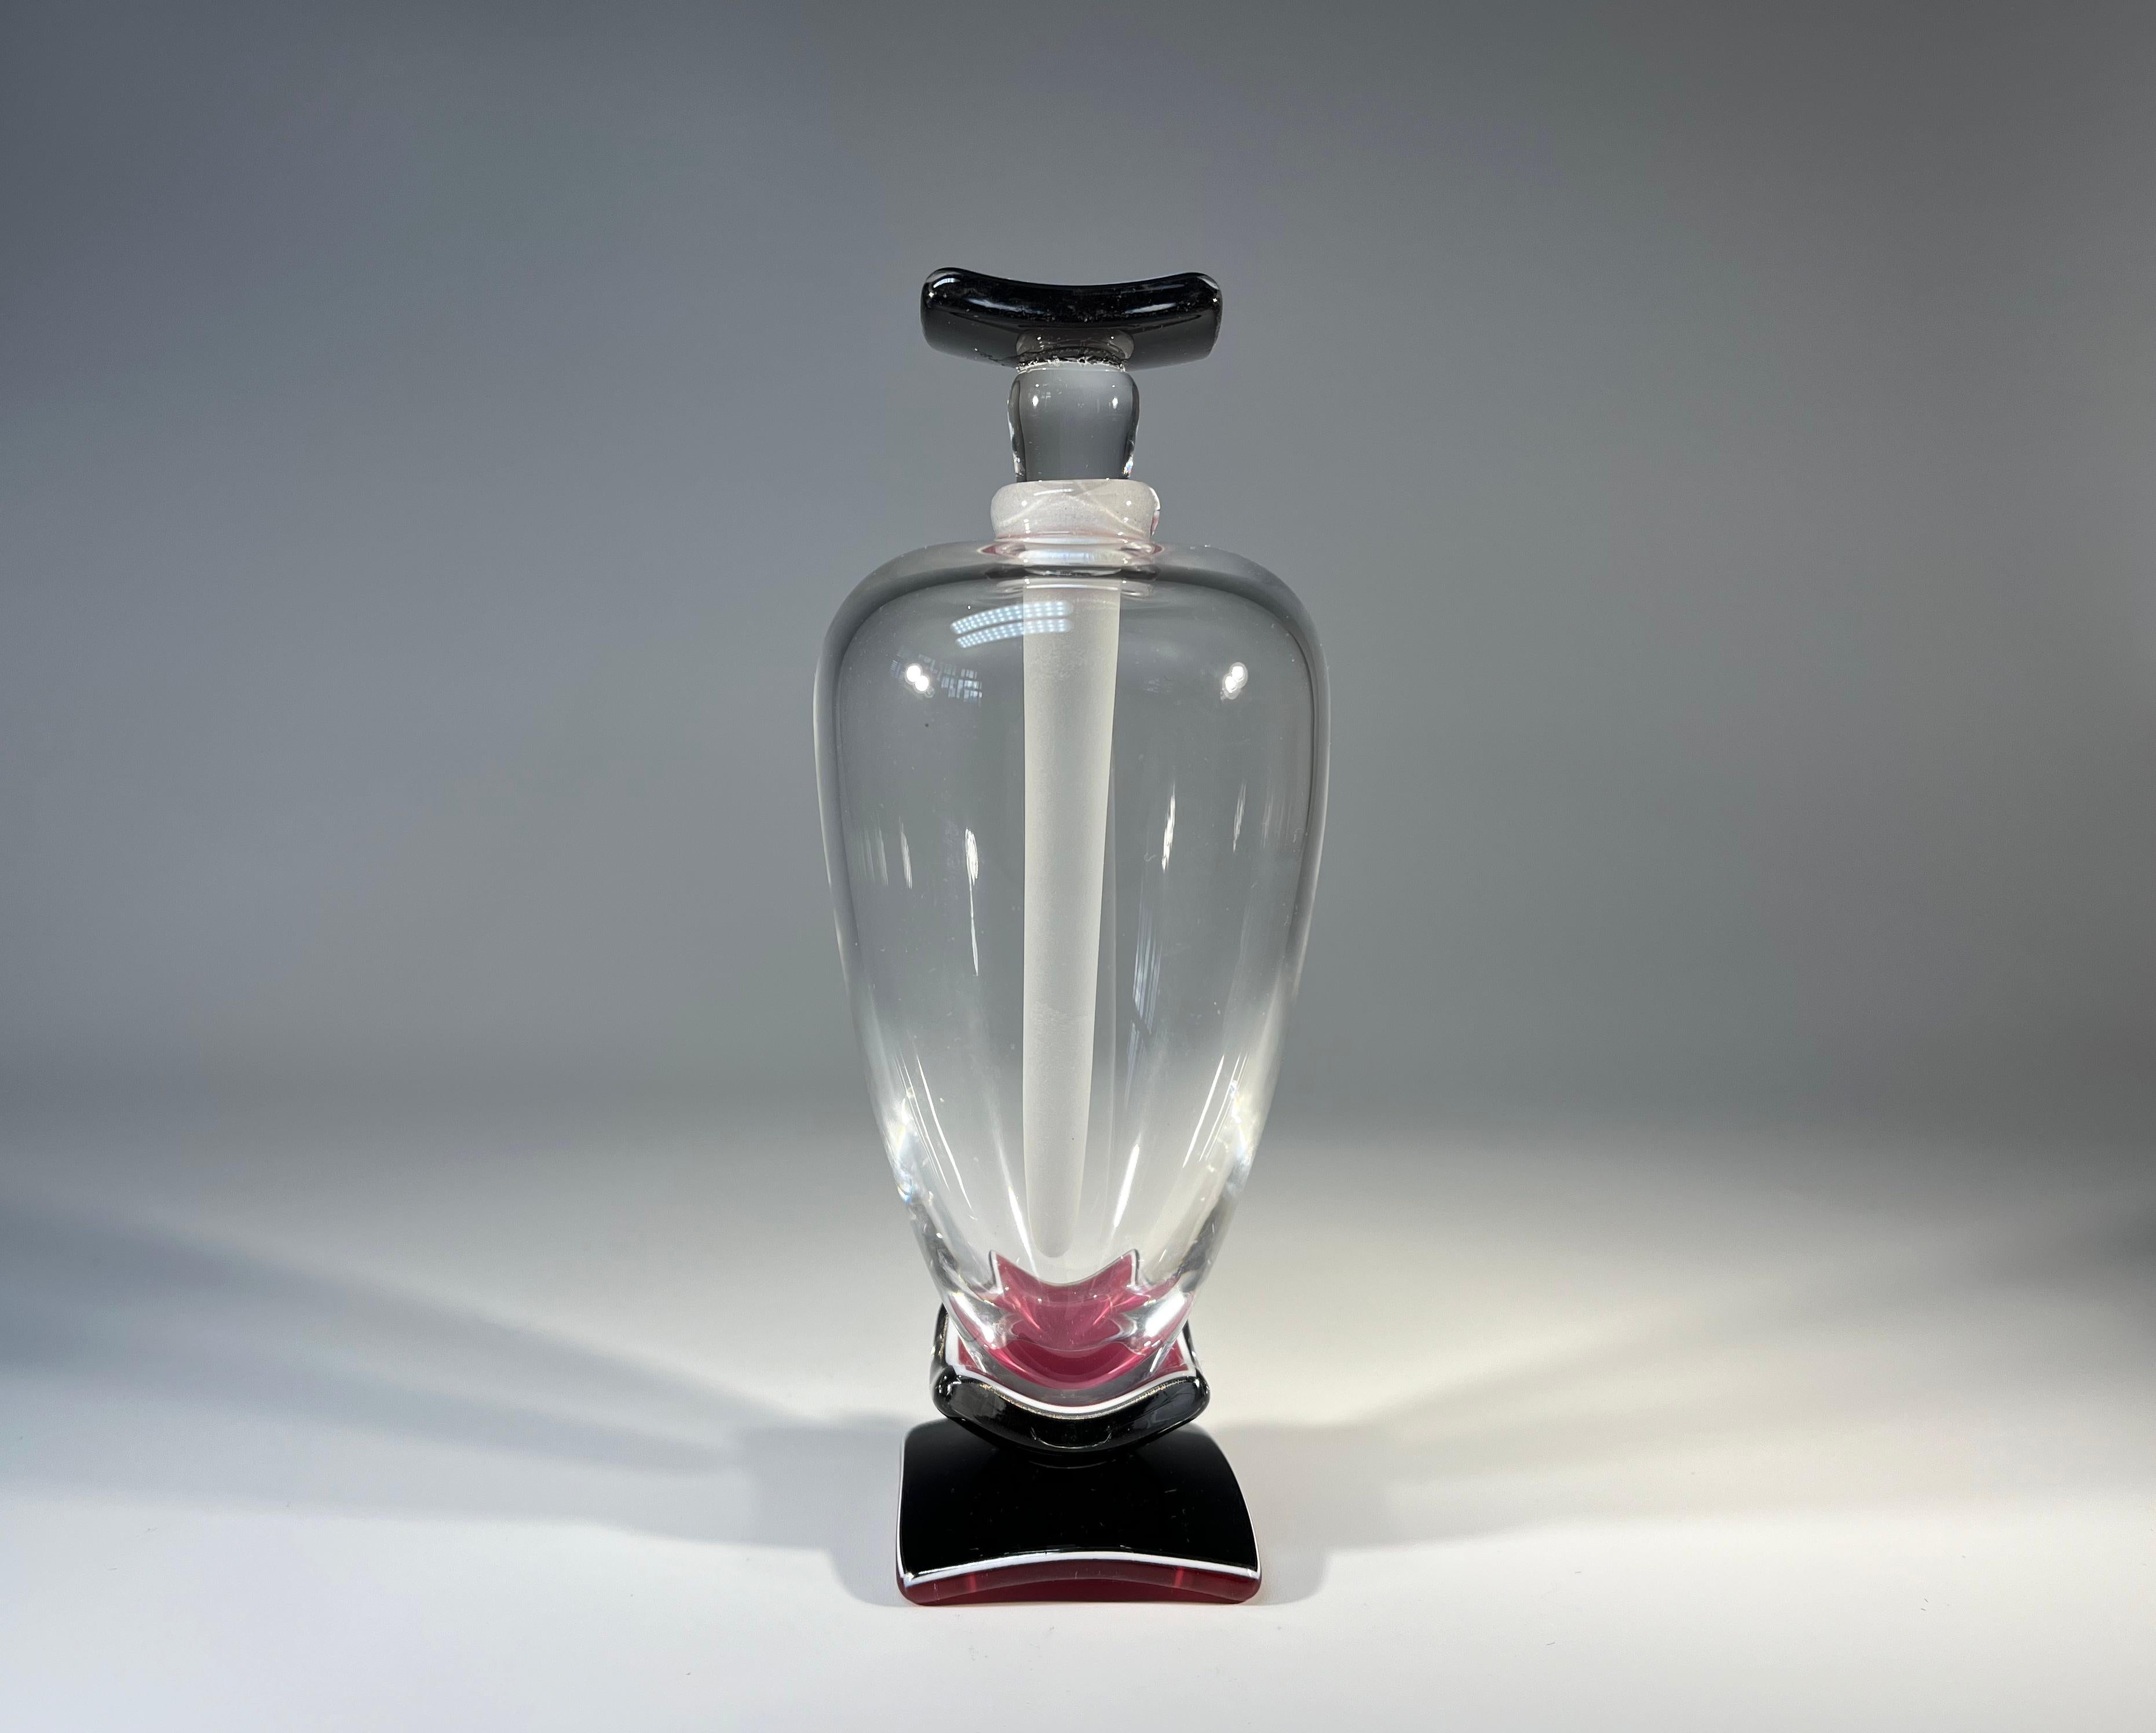 An elegantly tall perfume bottle of clear, deep rose pink and black crystal
Especial elongated frosted crystal stopper
Created by superbly talented glass artist Anthony Wassell, England
Signature etched to base
Circa 1990-2003
Height with stopper 6